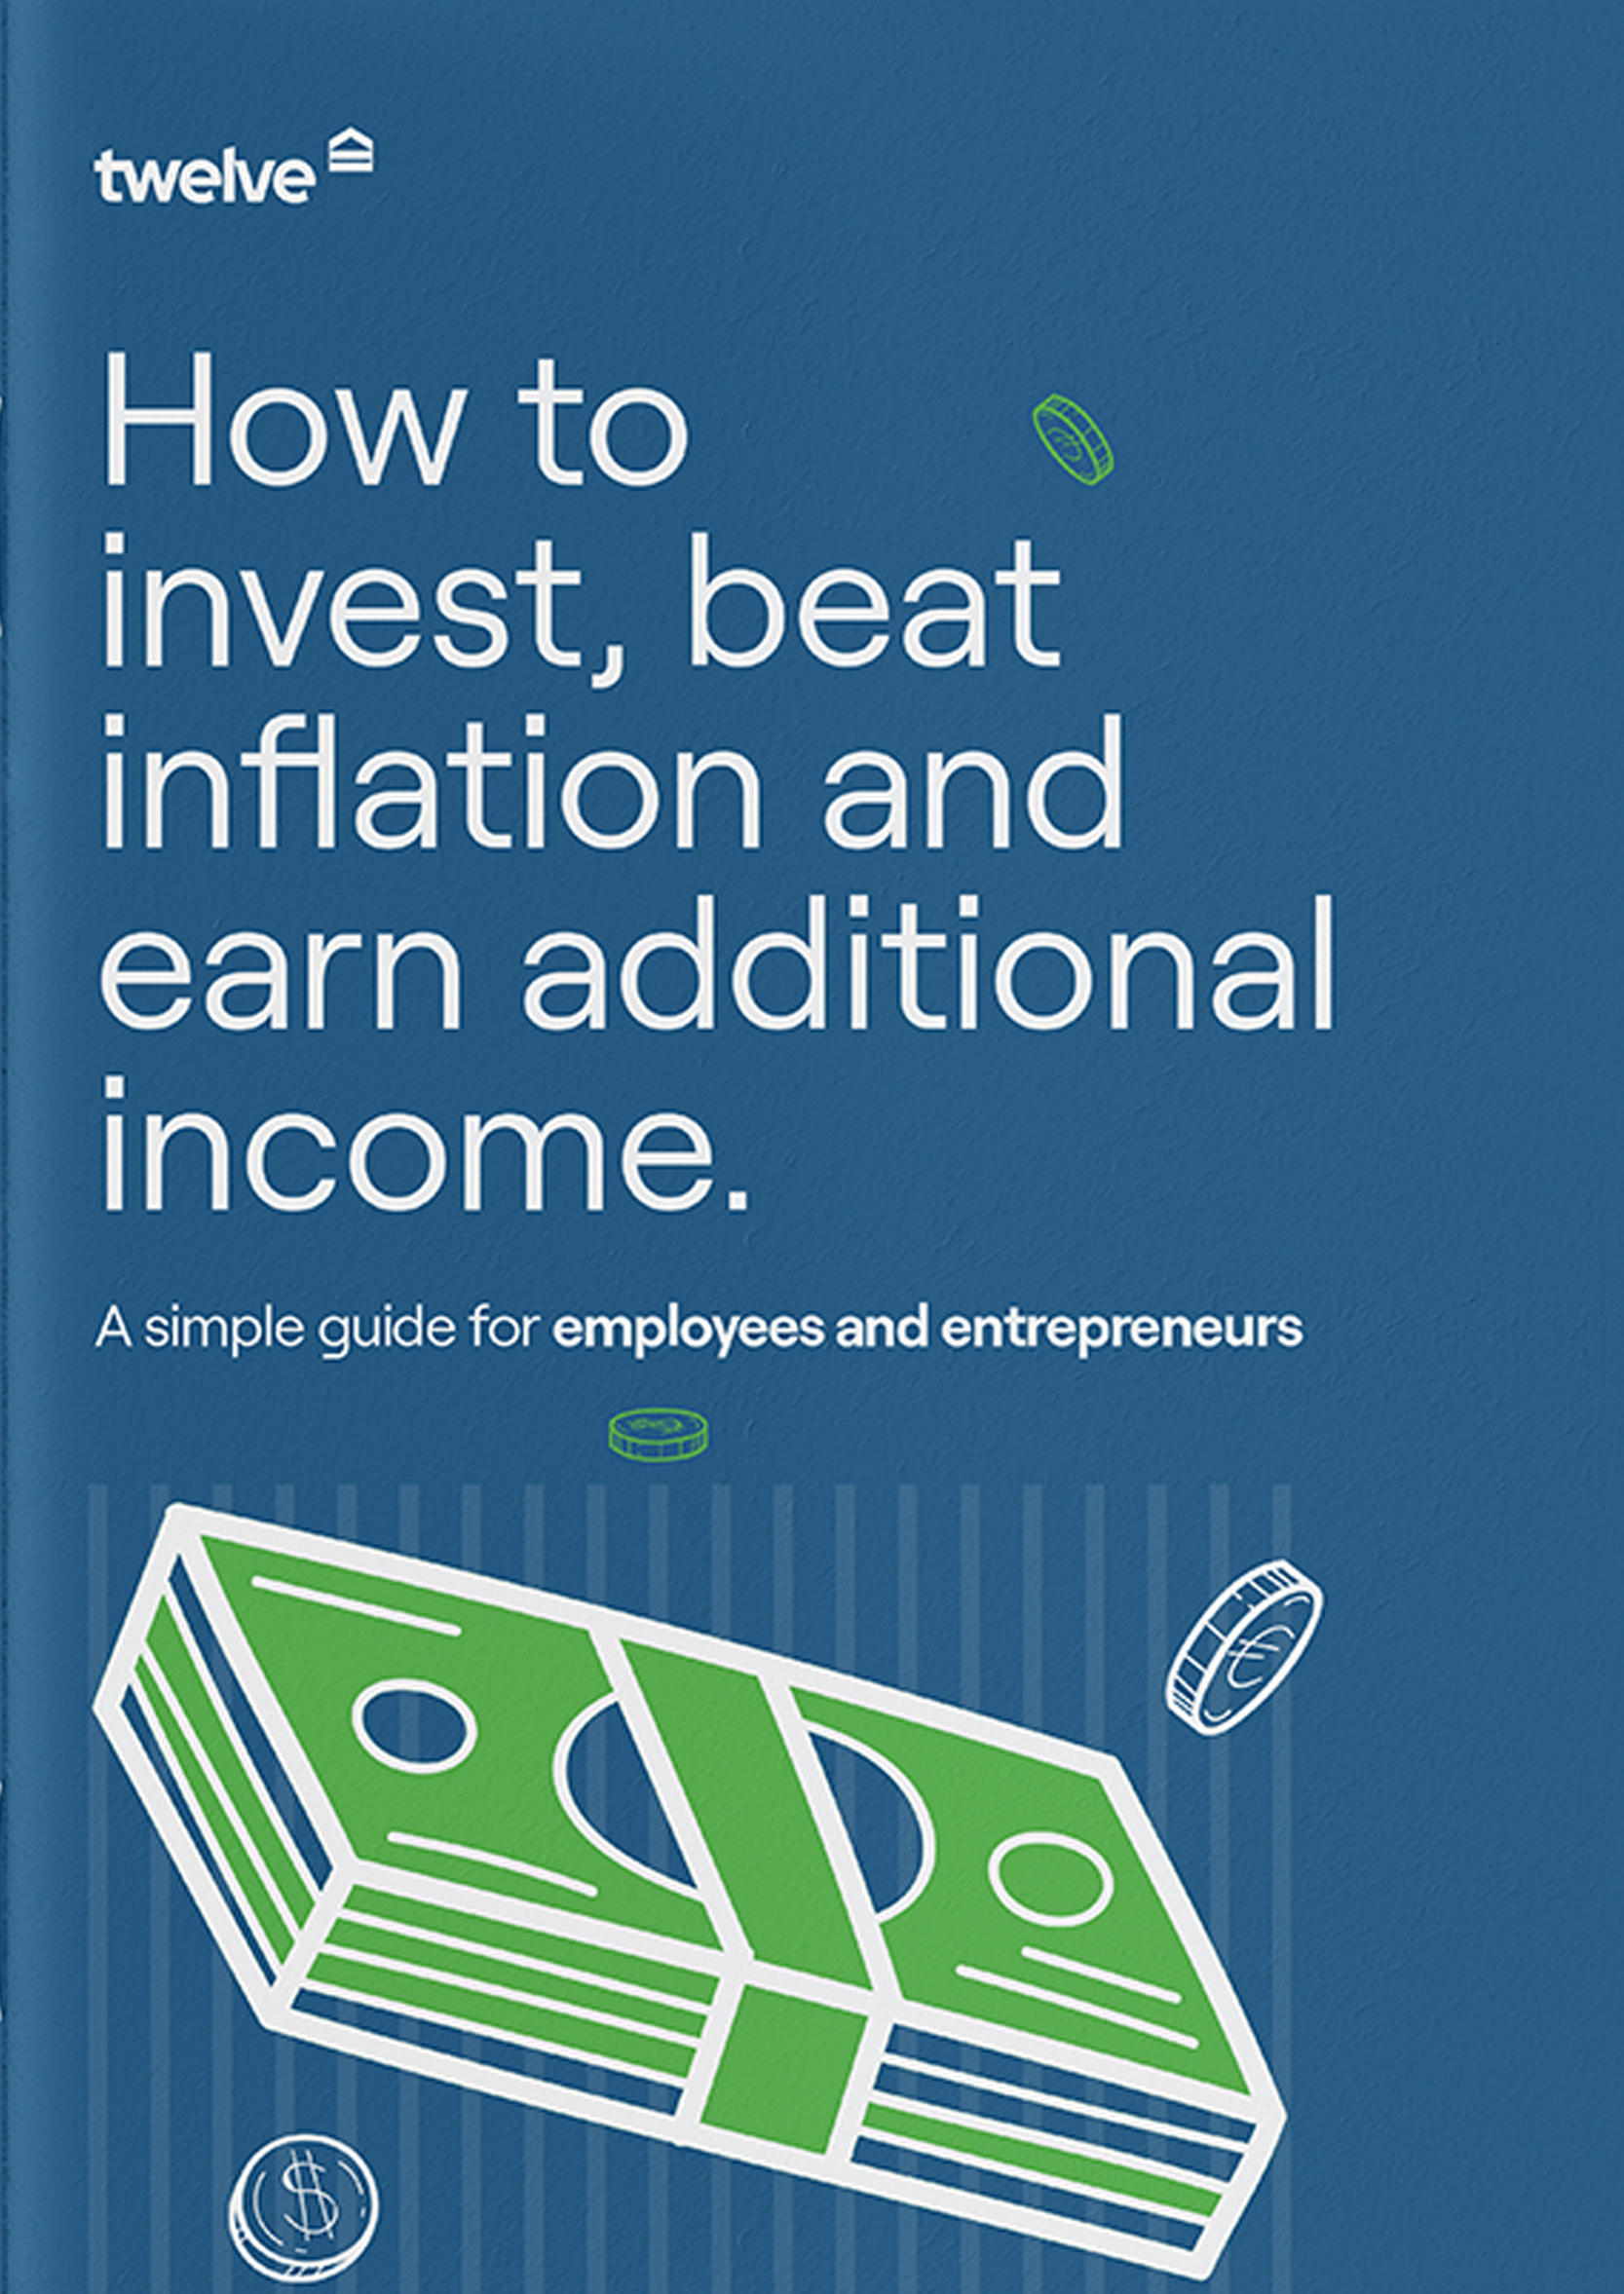 How to invest, beat inflation and earn additional income